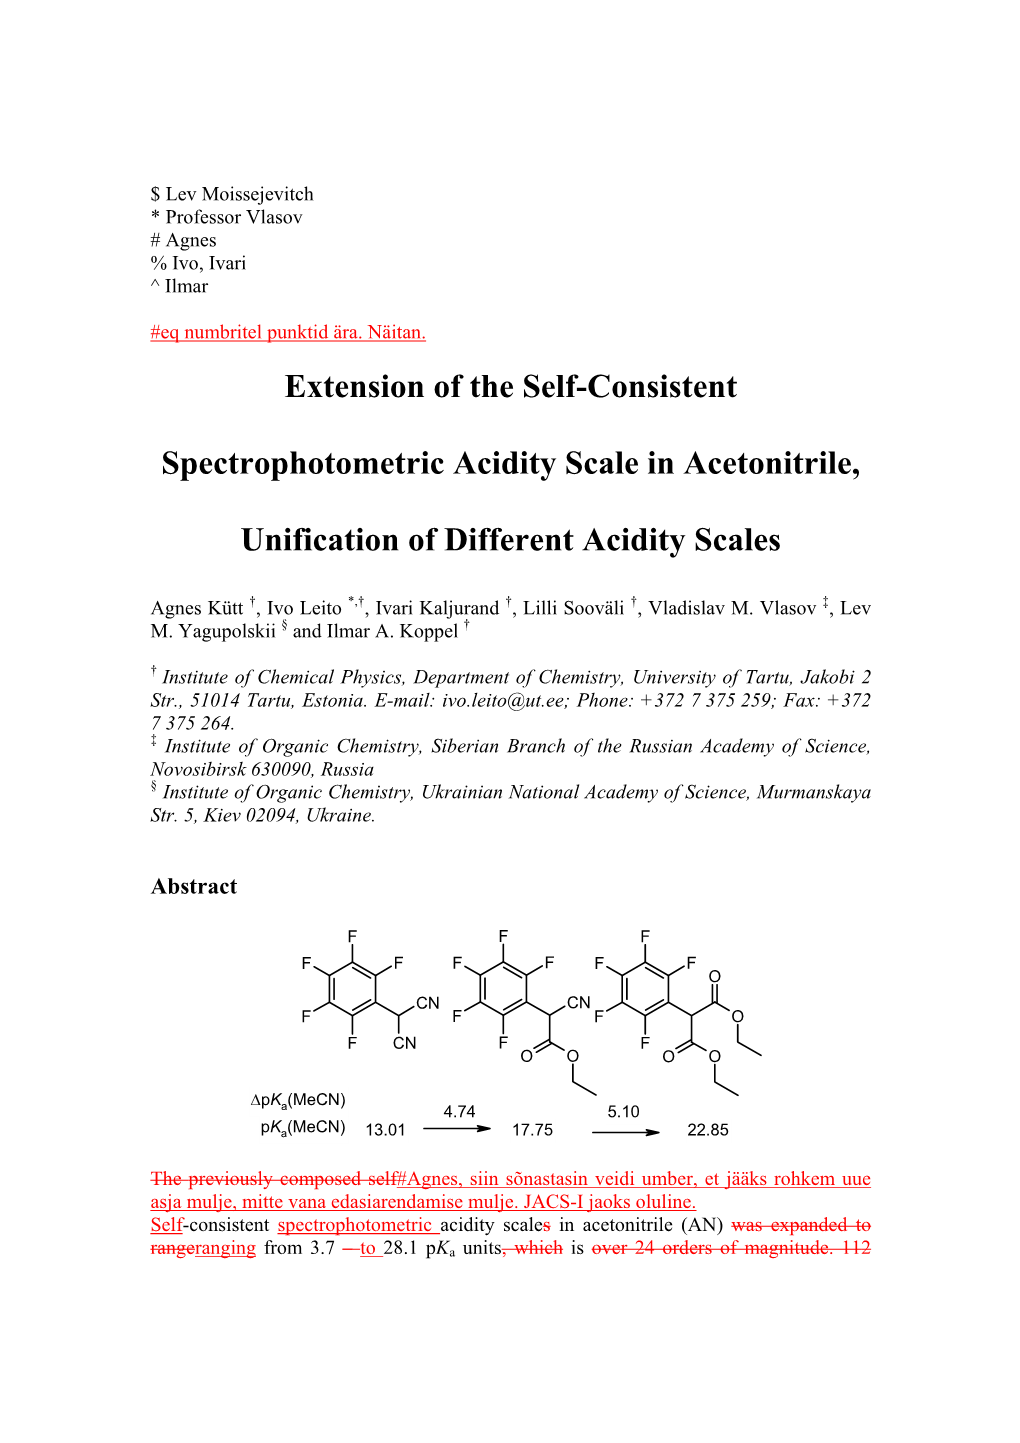 Extension of the Self-Consistent Spectrophotometric Acidity Scale In